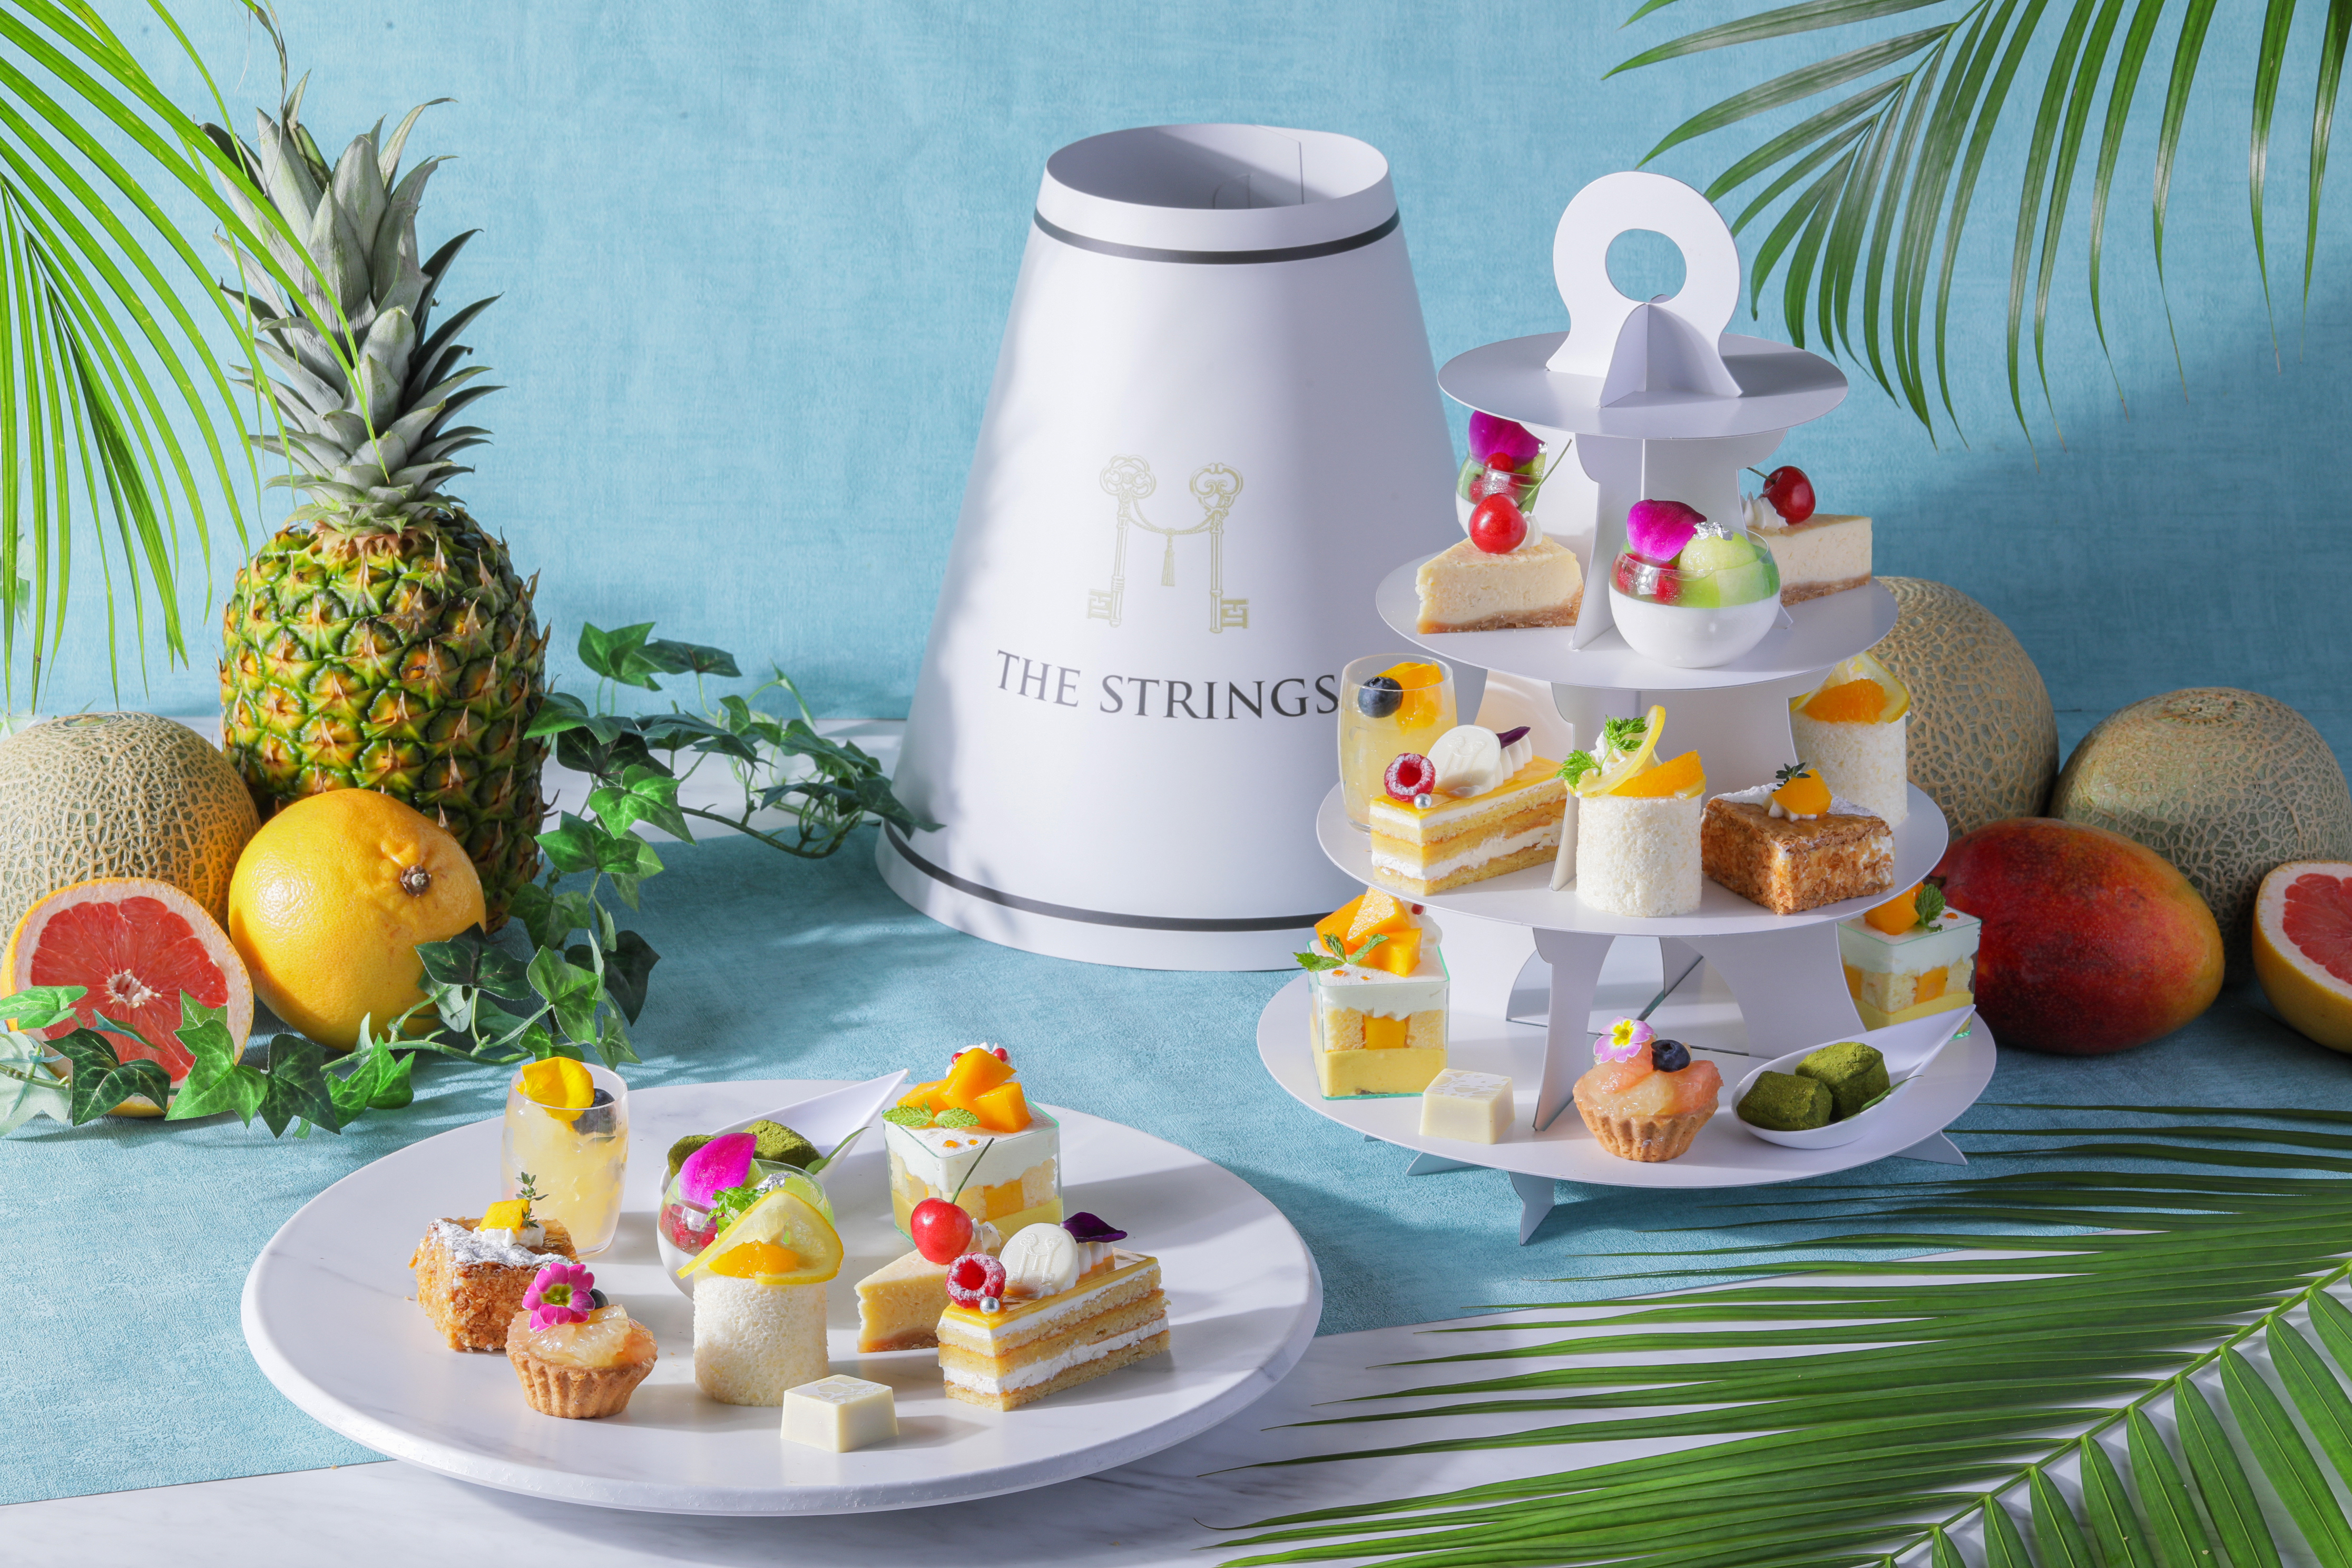 「STRINGS Sweets Collection～Summer～」 テイクアウト販売開始